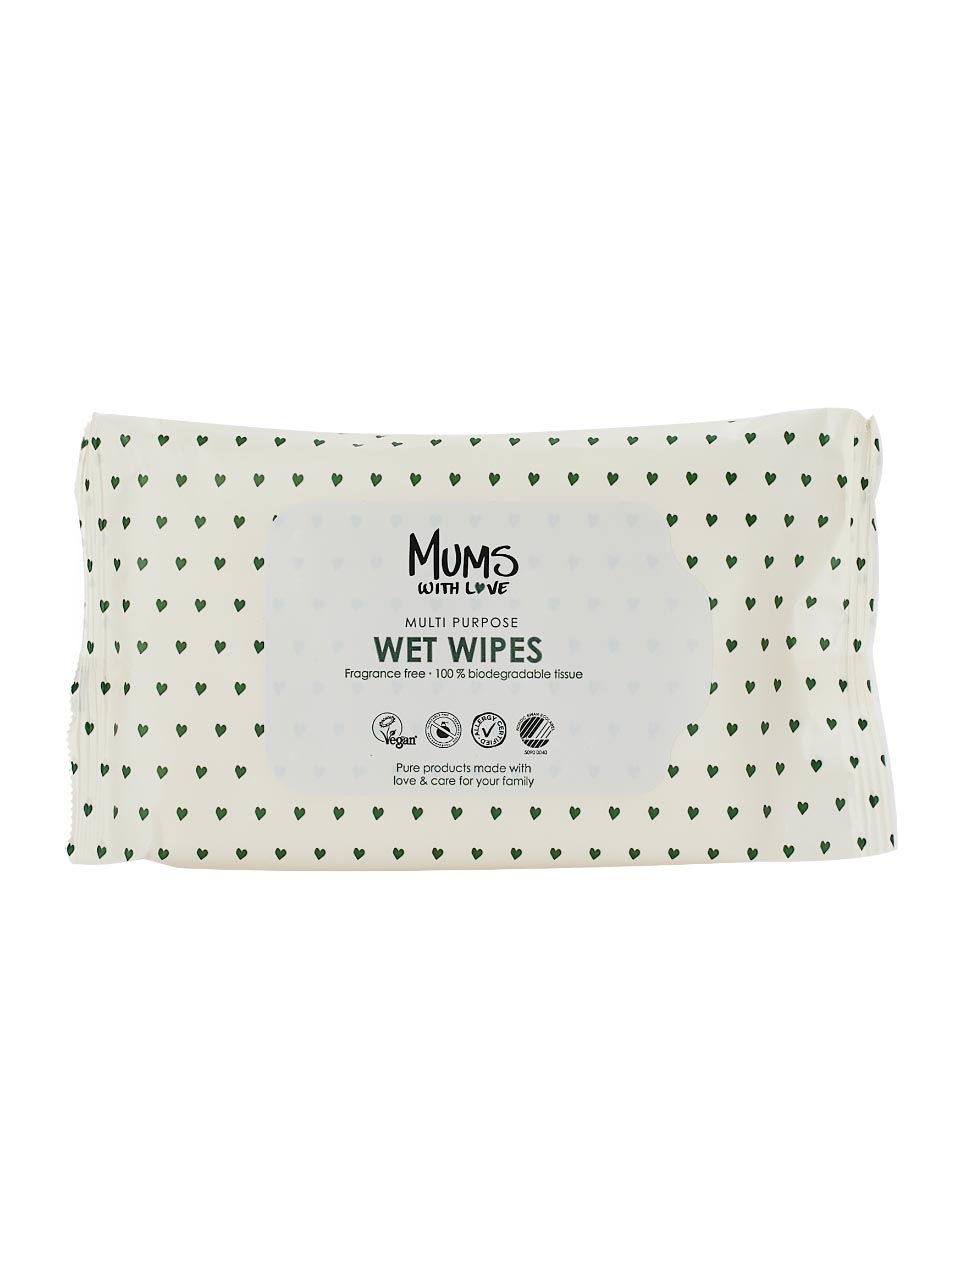 Mums with love Family Care Multi Purpose Wet Wipes 30 g null - onesize - 1